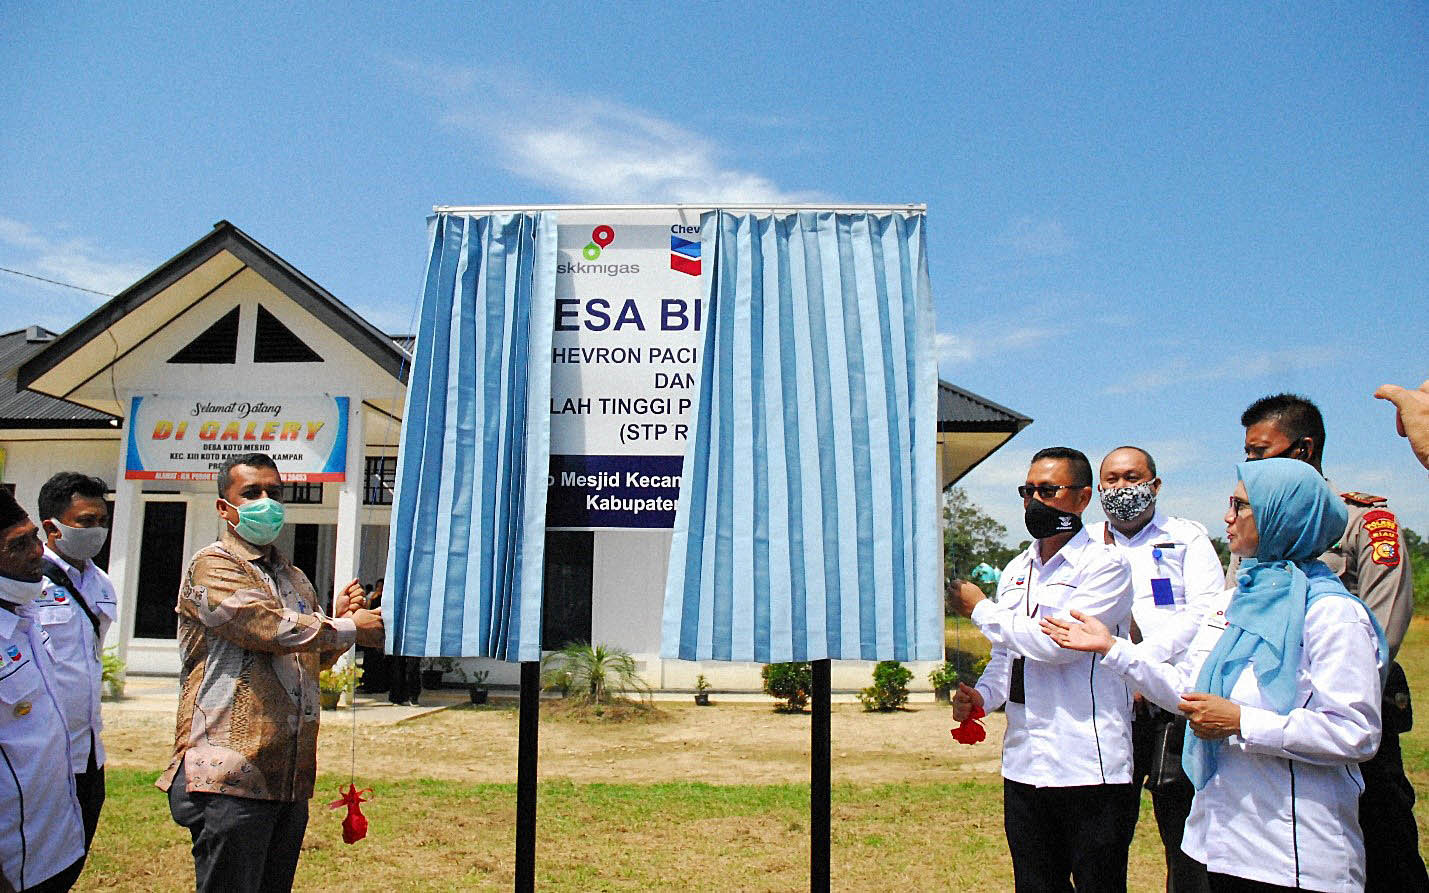 Chief Officer of Riau Province Tourism Rony Rahmad (left) and GM Corporate Affairs Asset PT CPI Sukamto Tamrin pulling the curtain to inaugurate Patin Tourist Village Training Program in Koto Mesjid Village in June 2020.